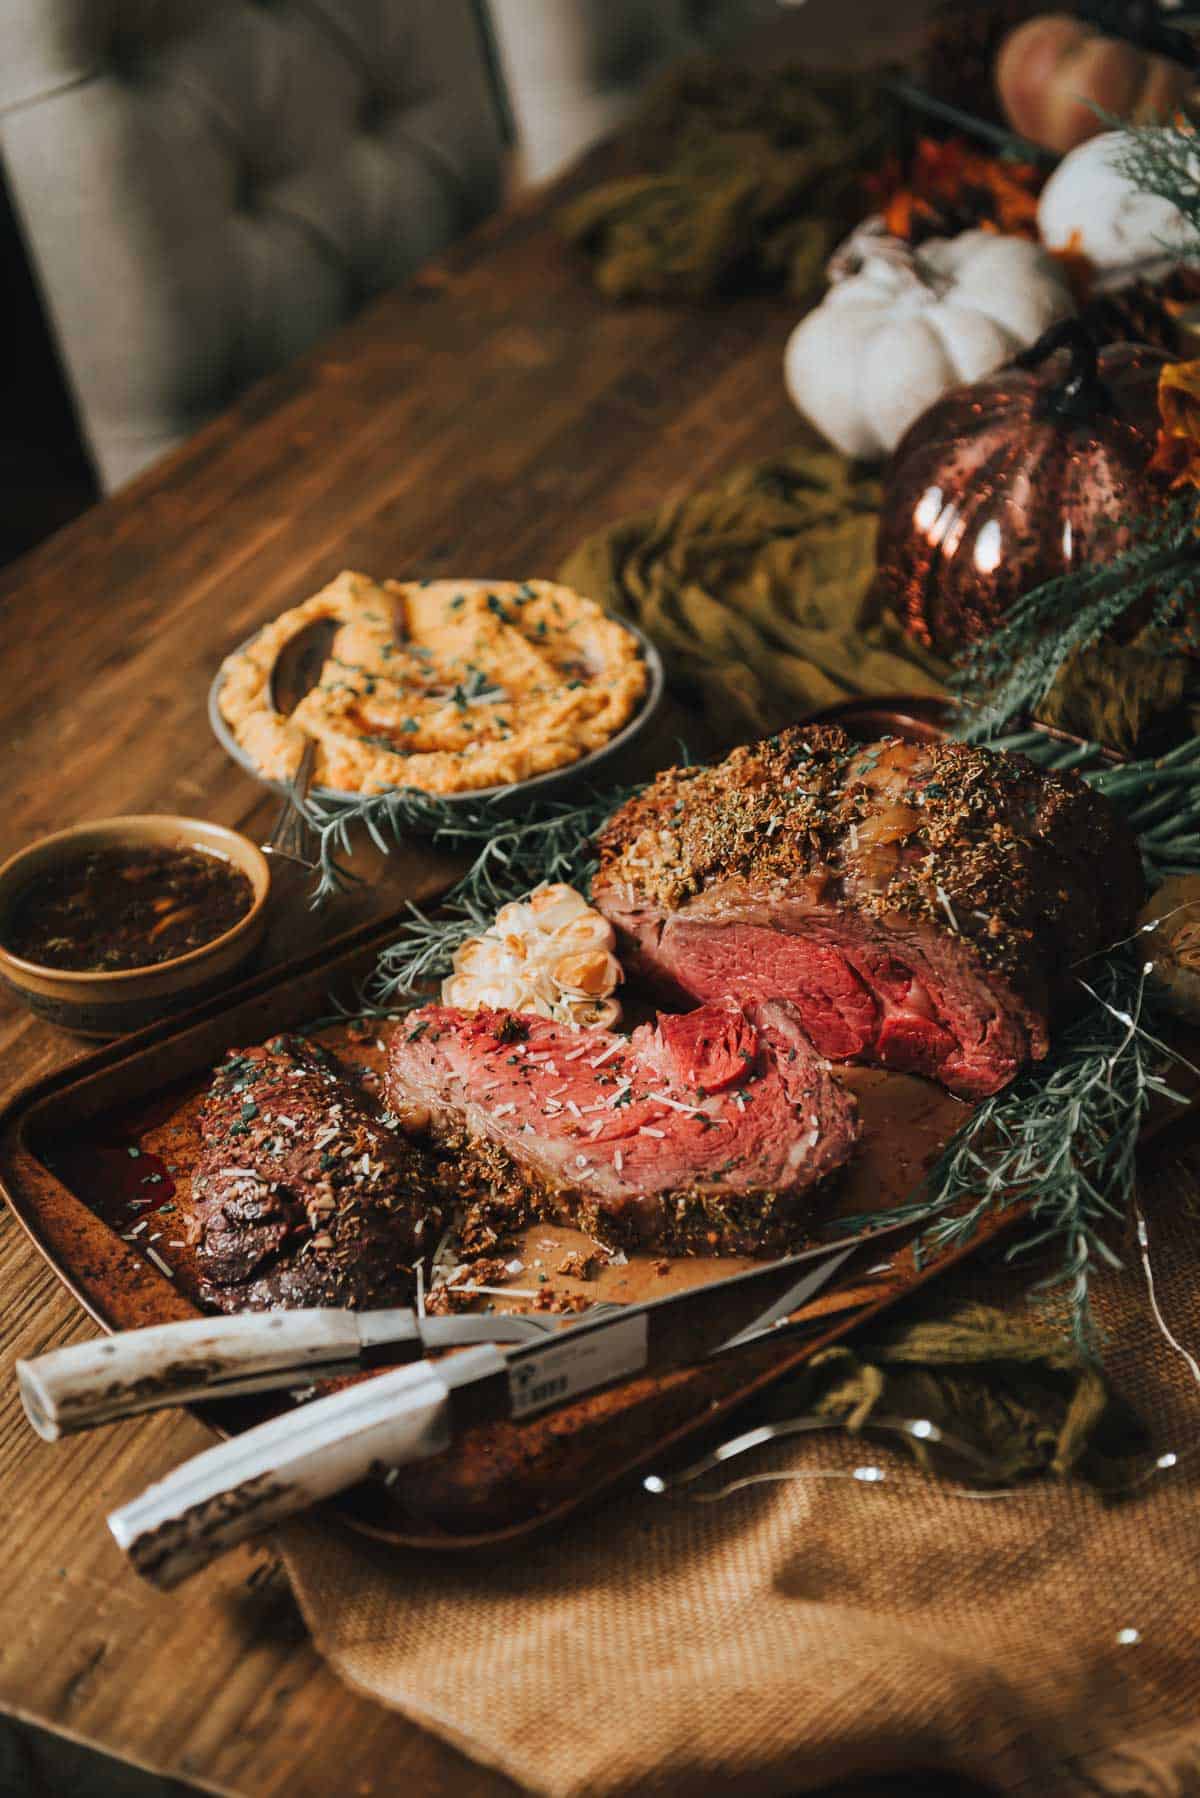 A table with a standing rib roast, vegetables, and a knife.